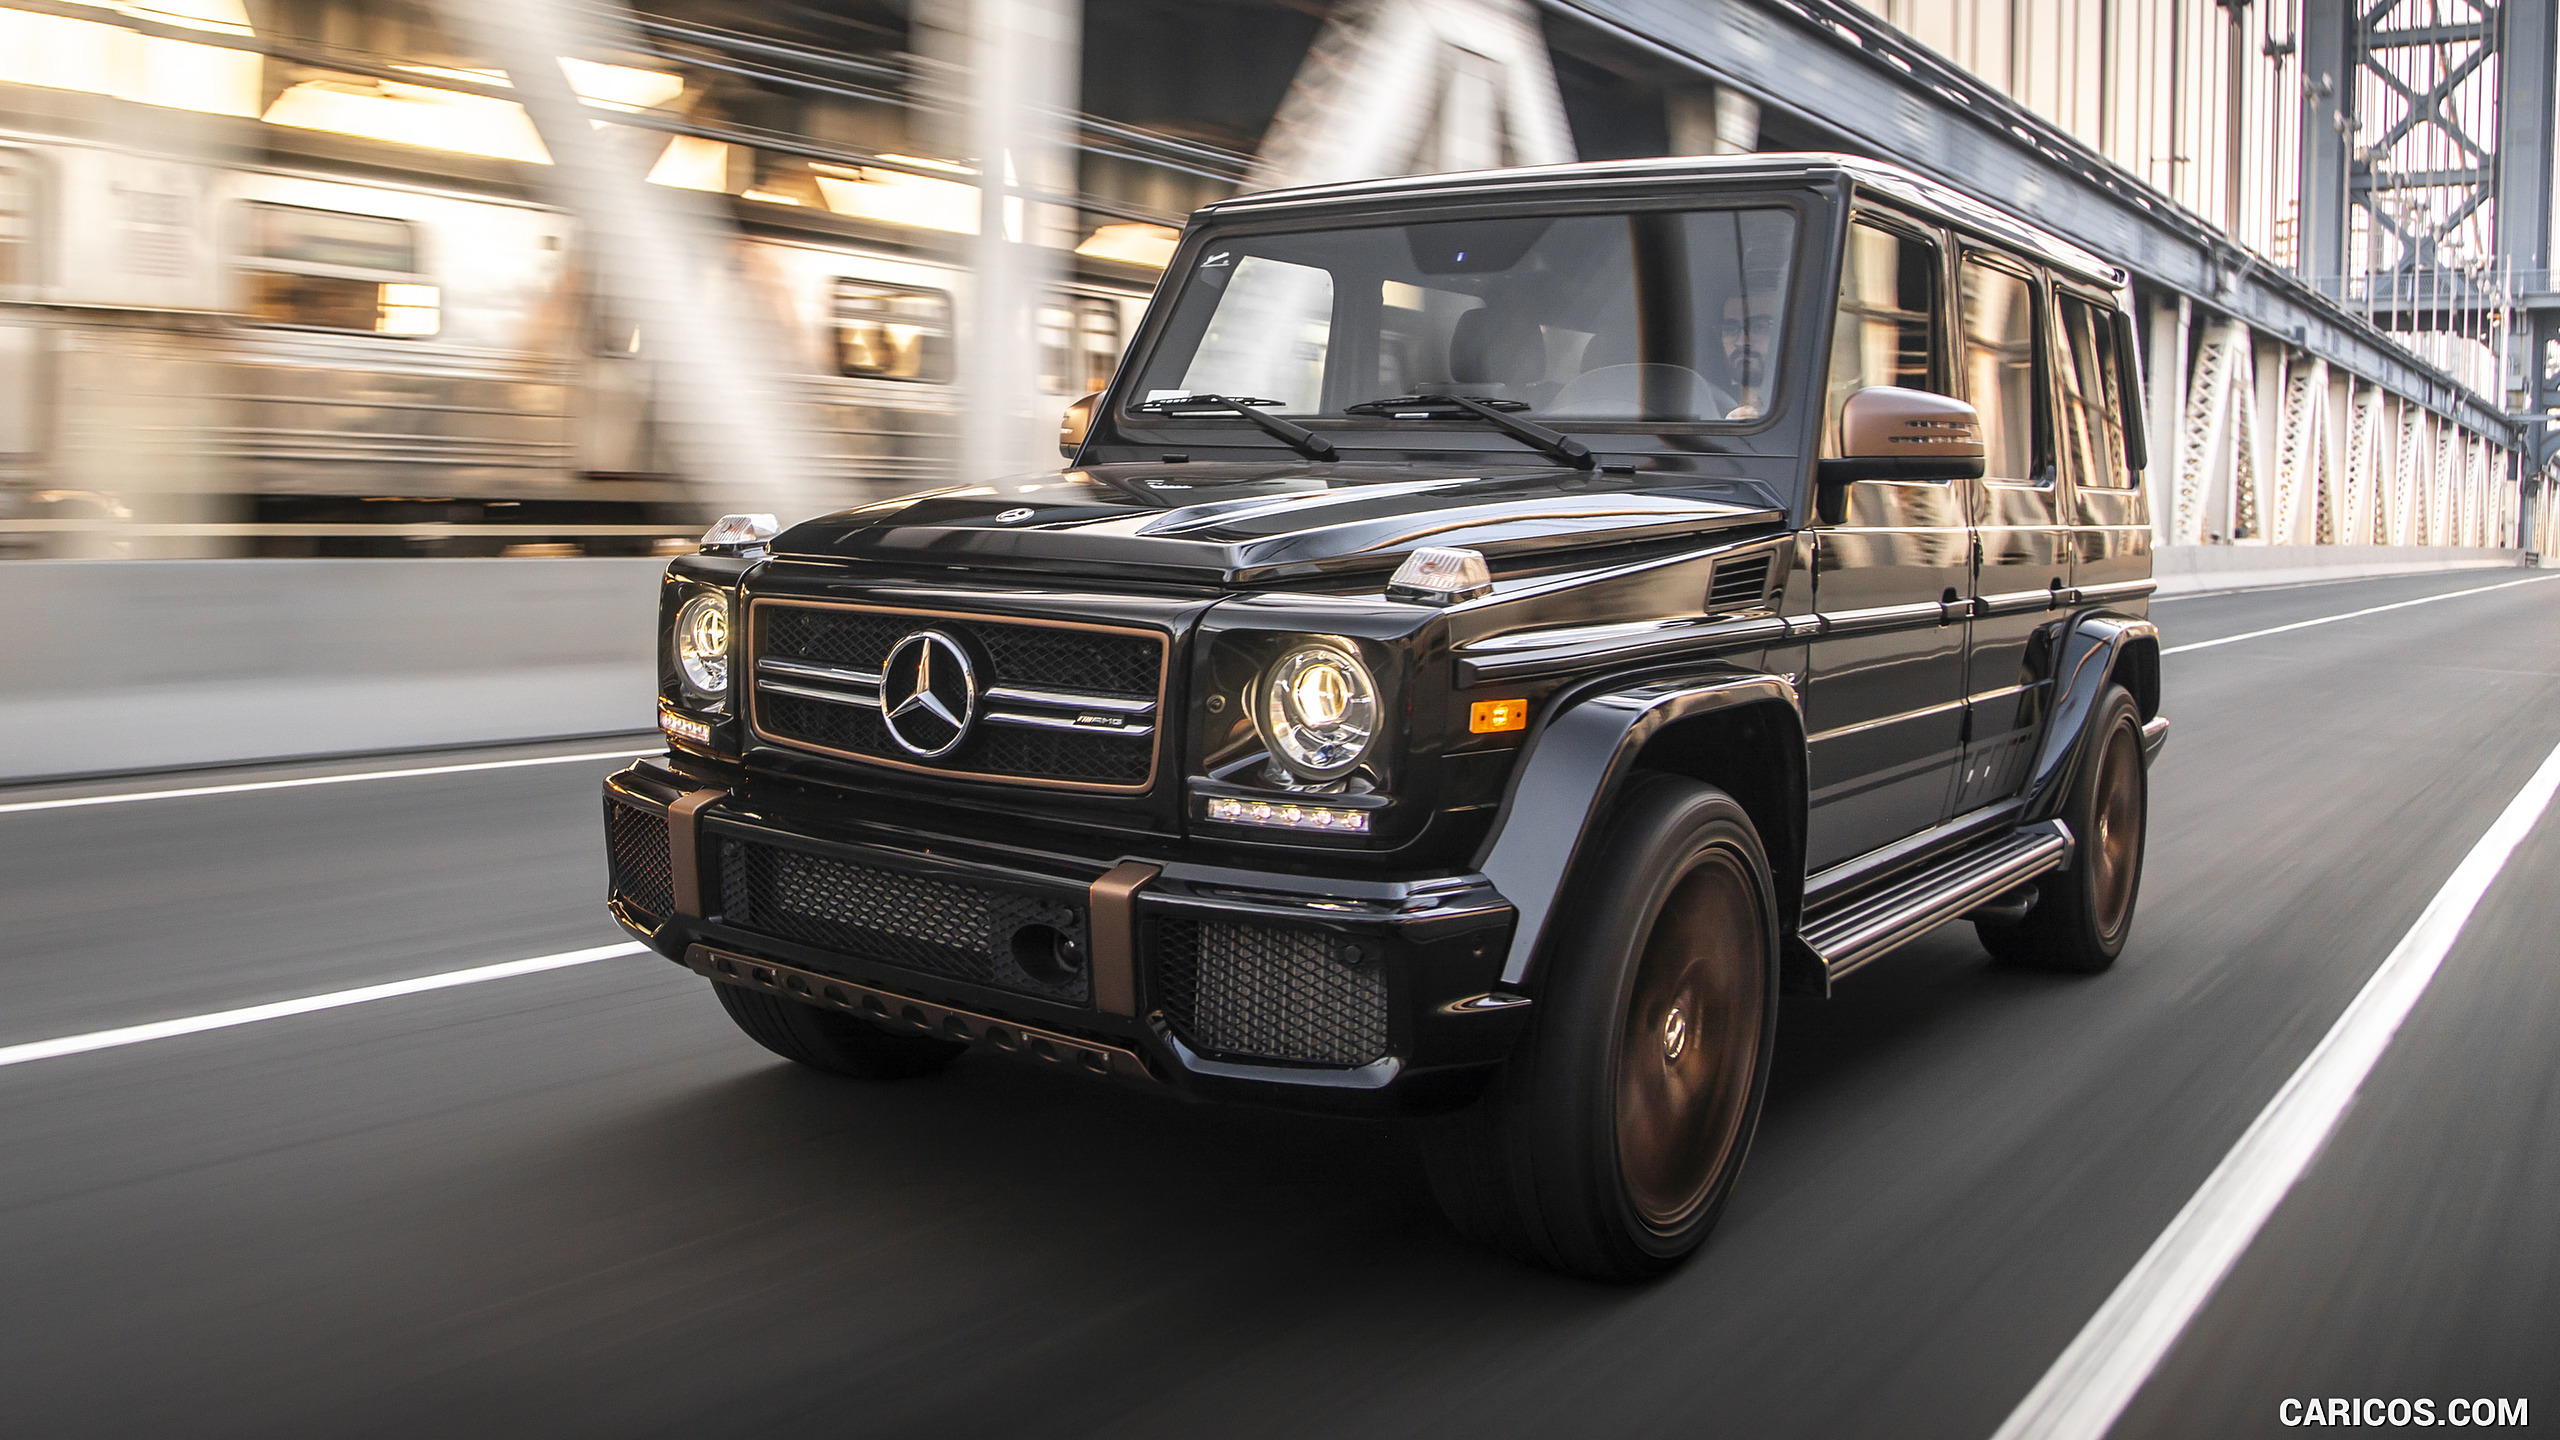 2018 Mercedes-AMG G65 Final Edition (US-Spec) - Front Three-Quarter, #17 of 70